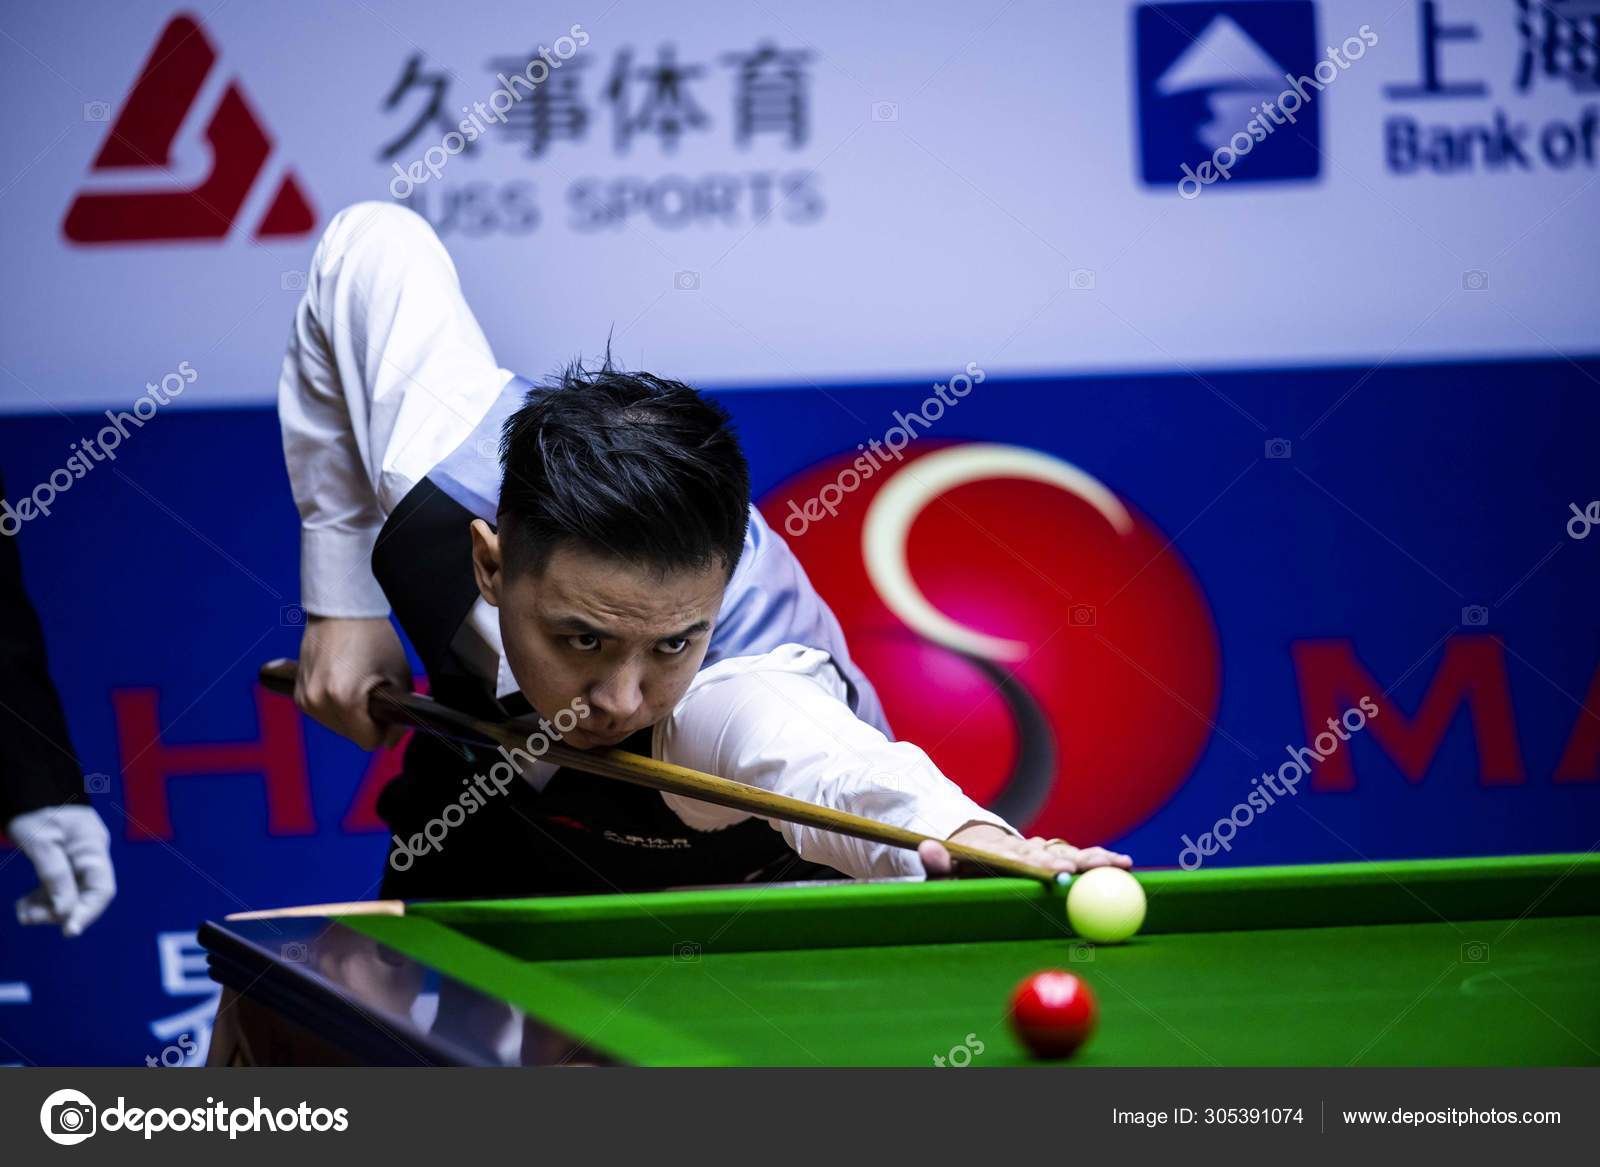 Chinese Professional Snooker Player Xiao Guodong Plays Shot Frist 2019